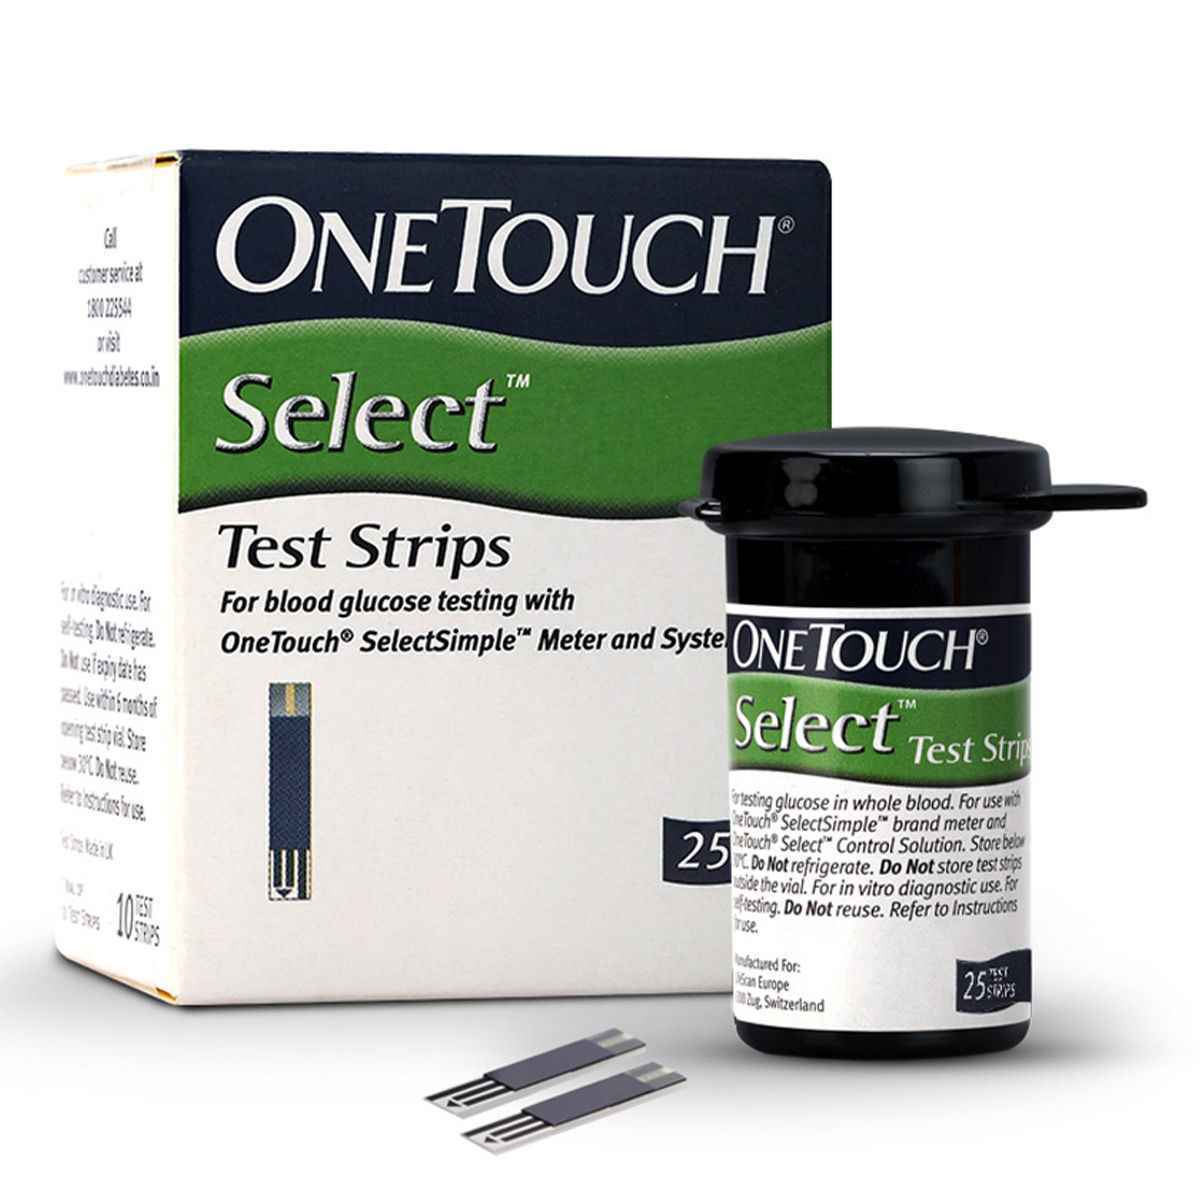 OneTouch Select Test Strips, 25 Count, Pack of 1 